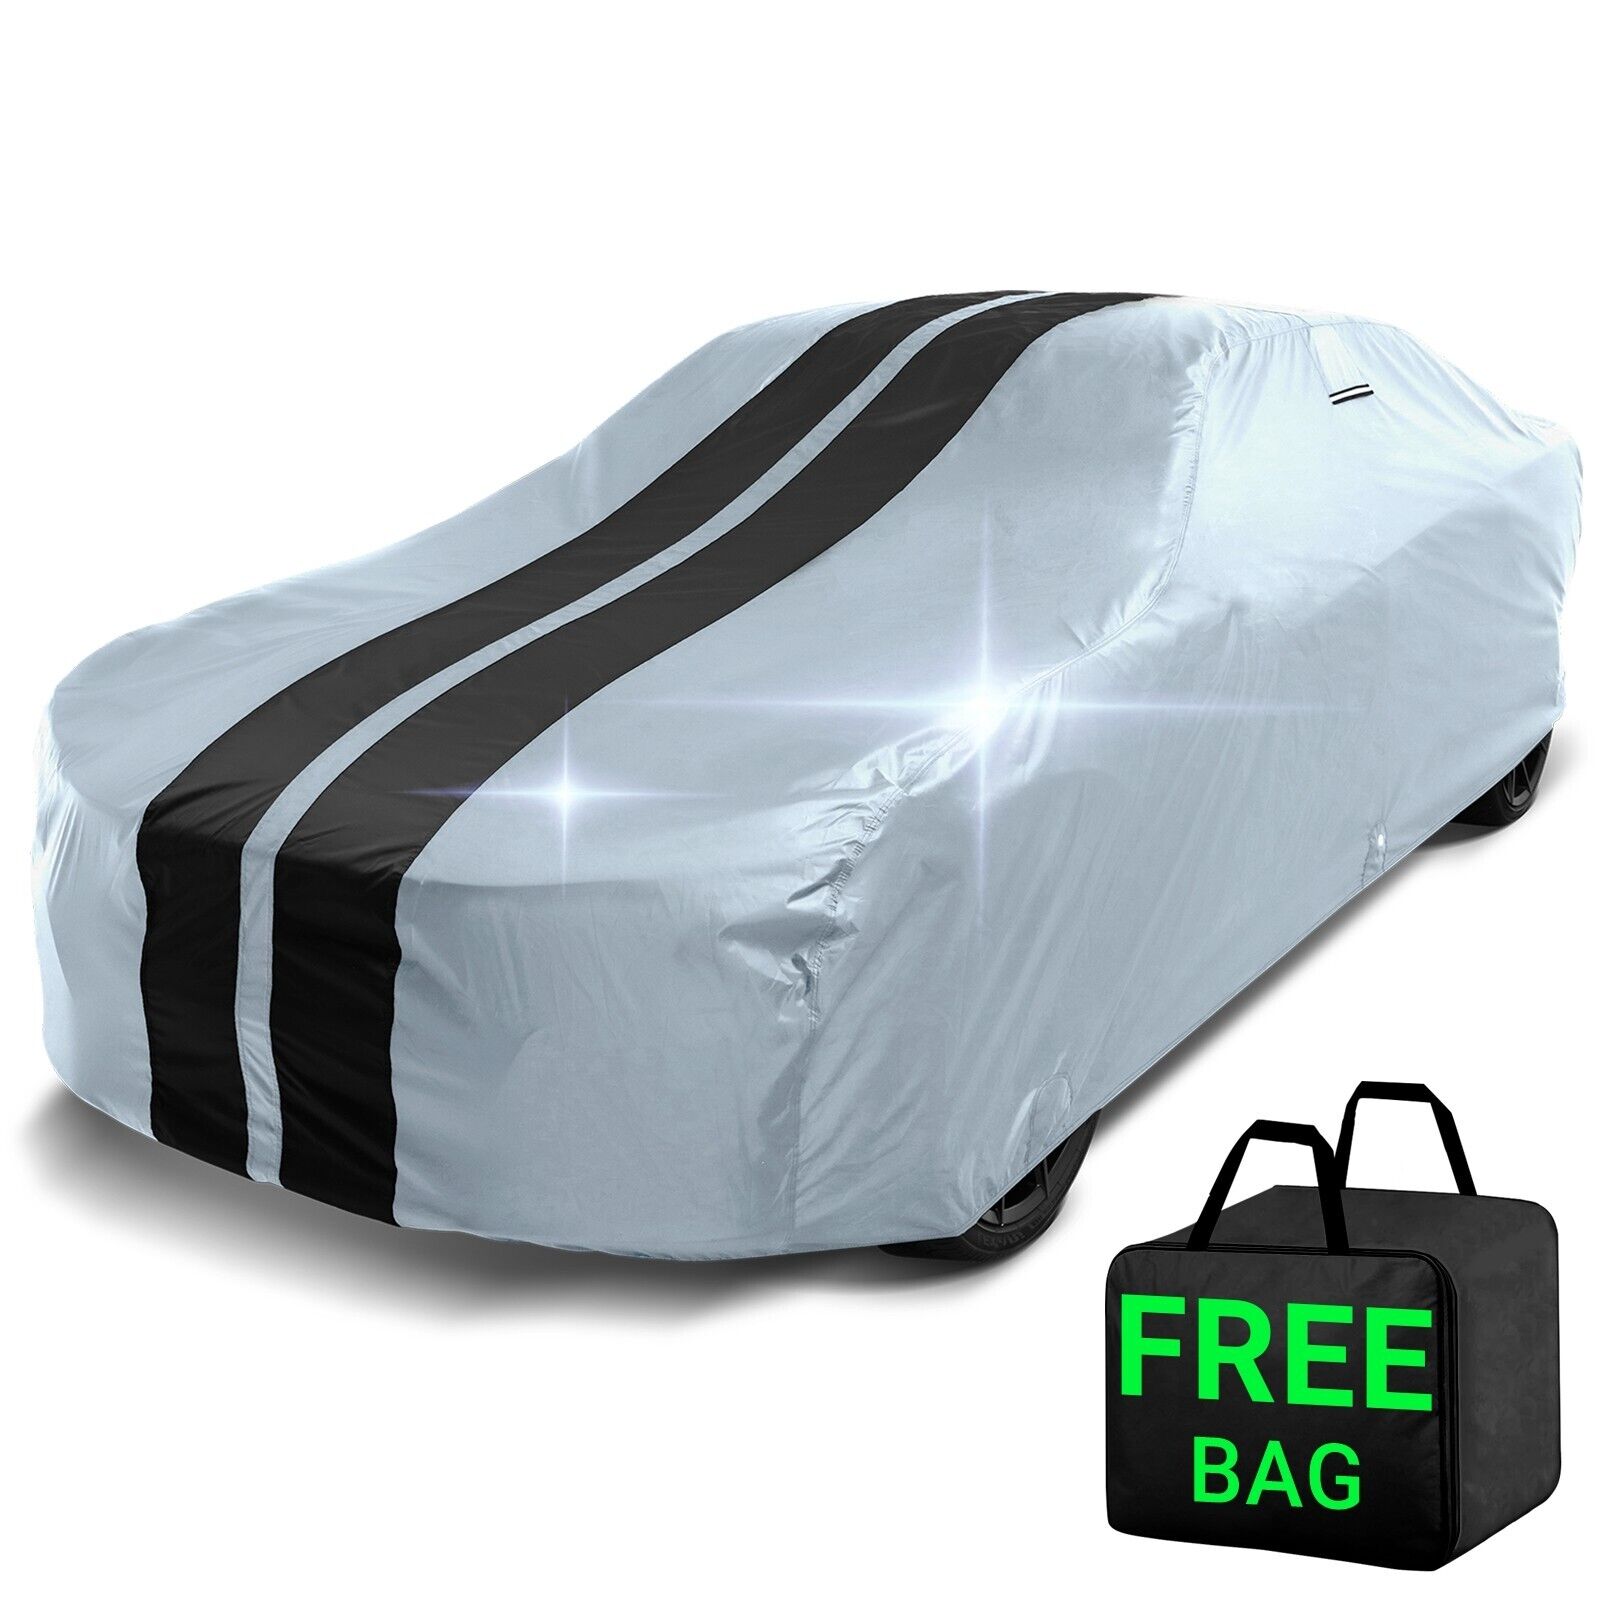 1952-1954 Packard Cavalier Custom Car Cover - All-Weather Waterproof Protection